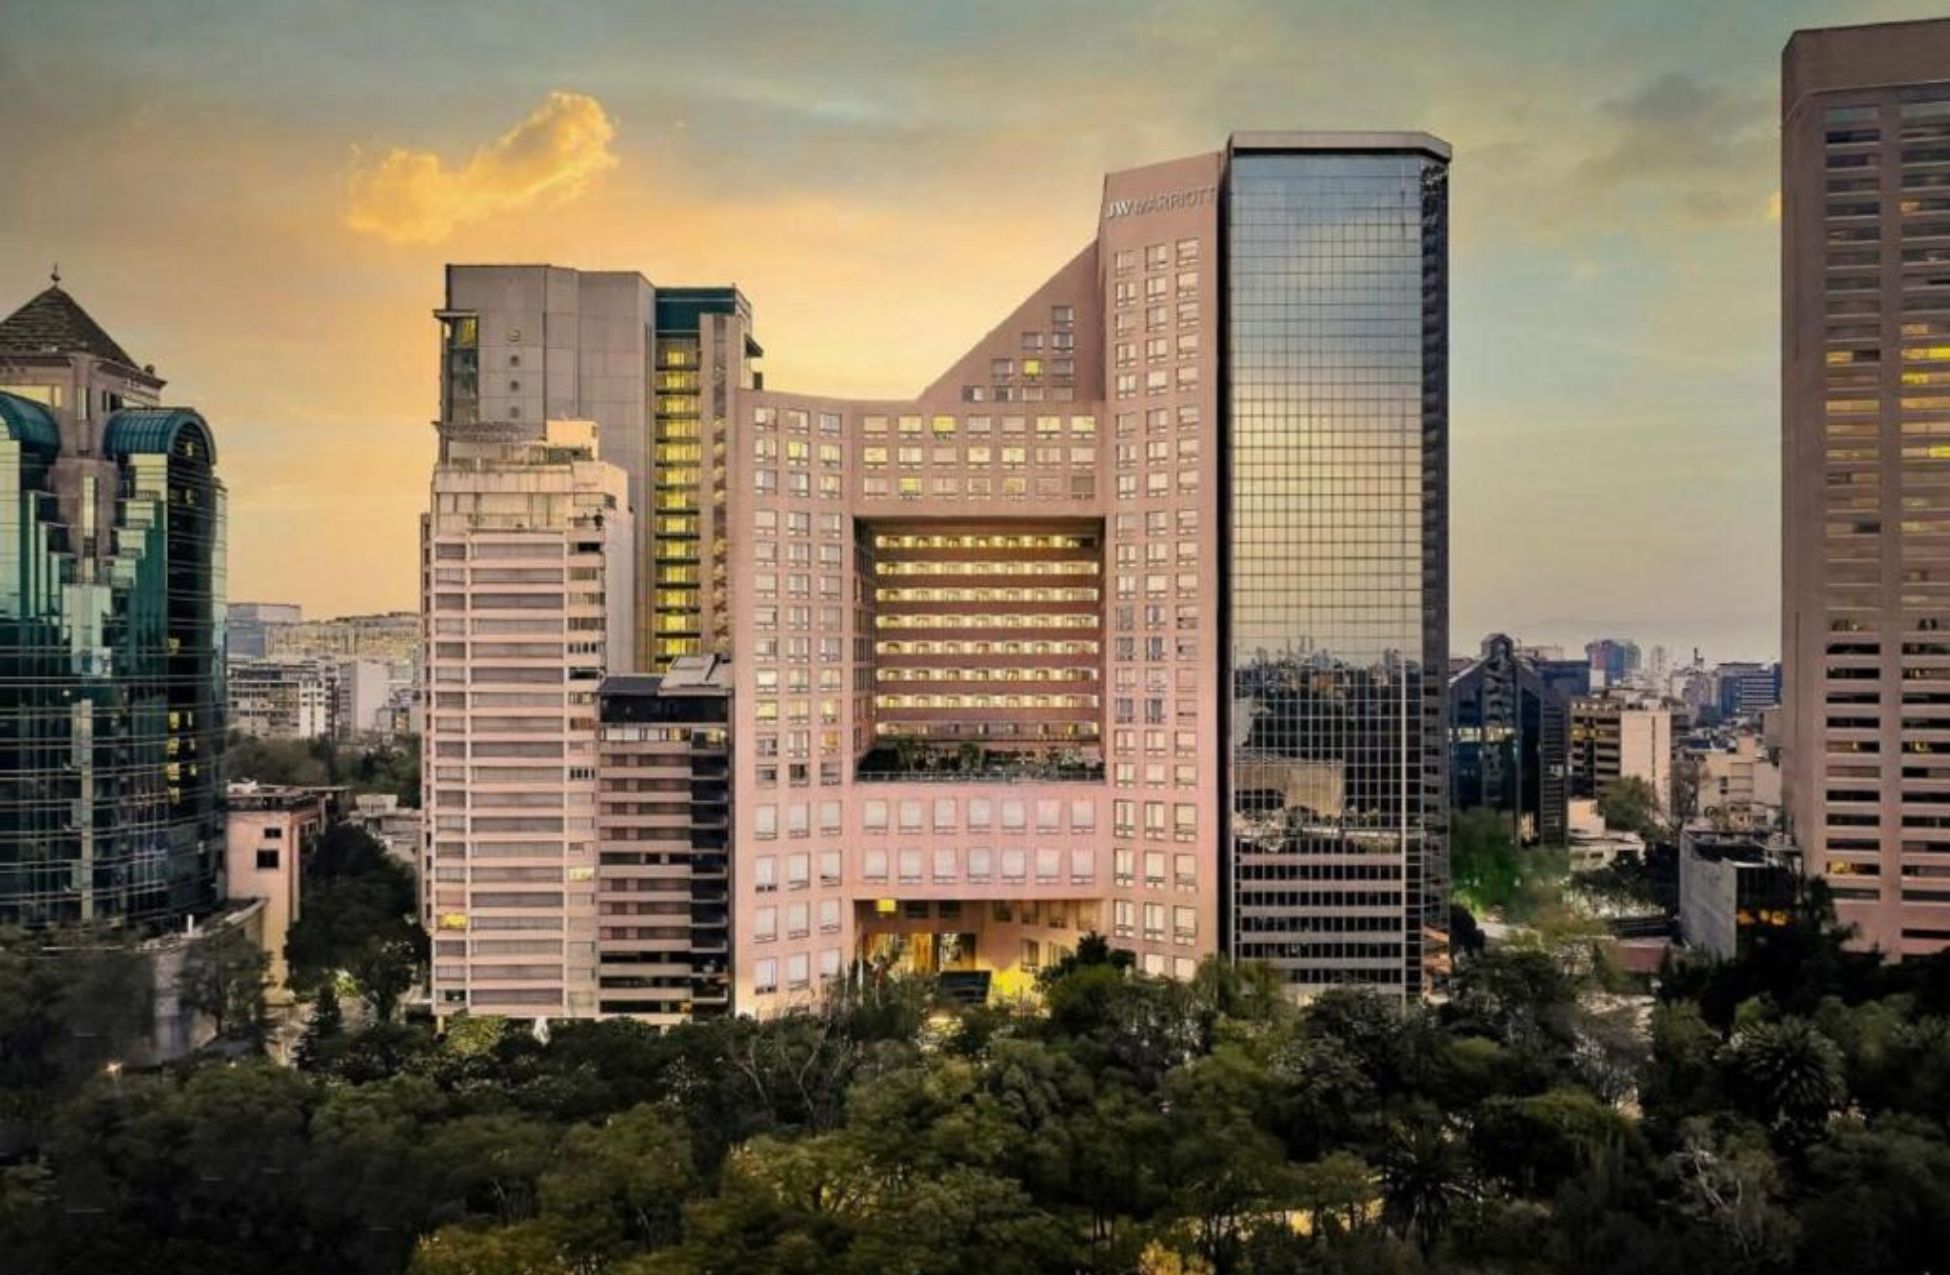 JW Marriott Hotel Mexico City - Best Hotels In Mexico City